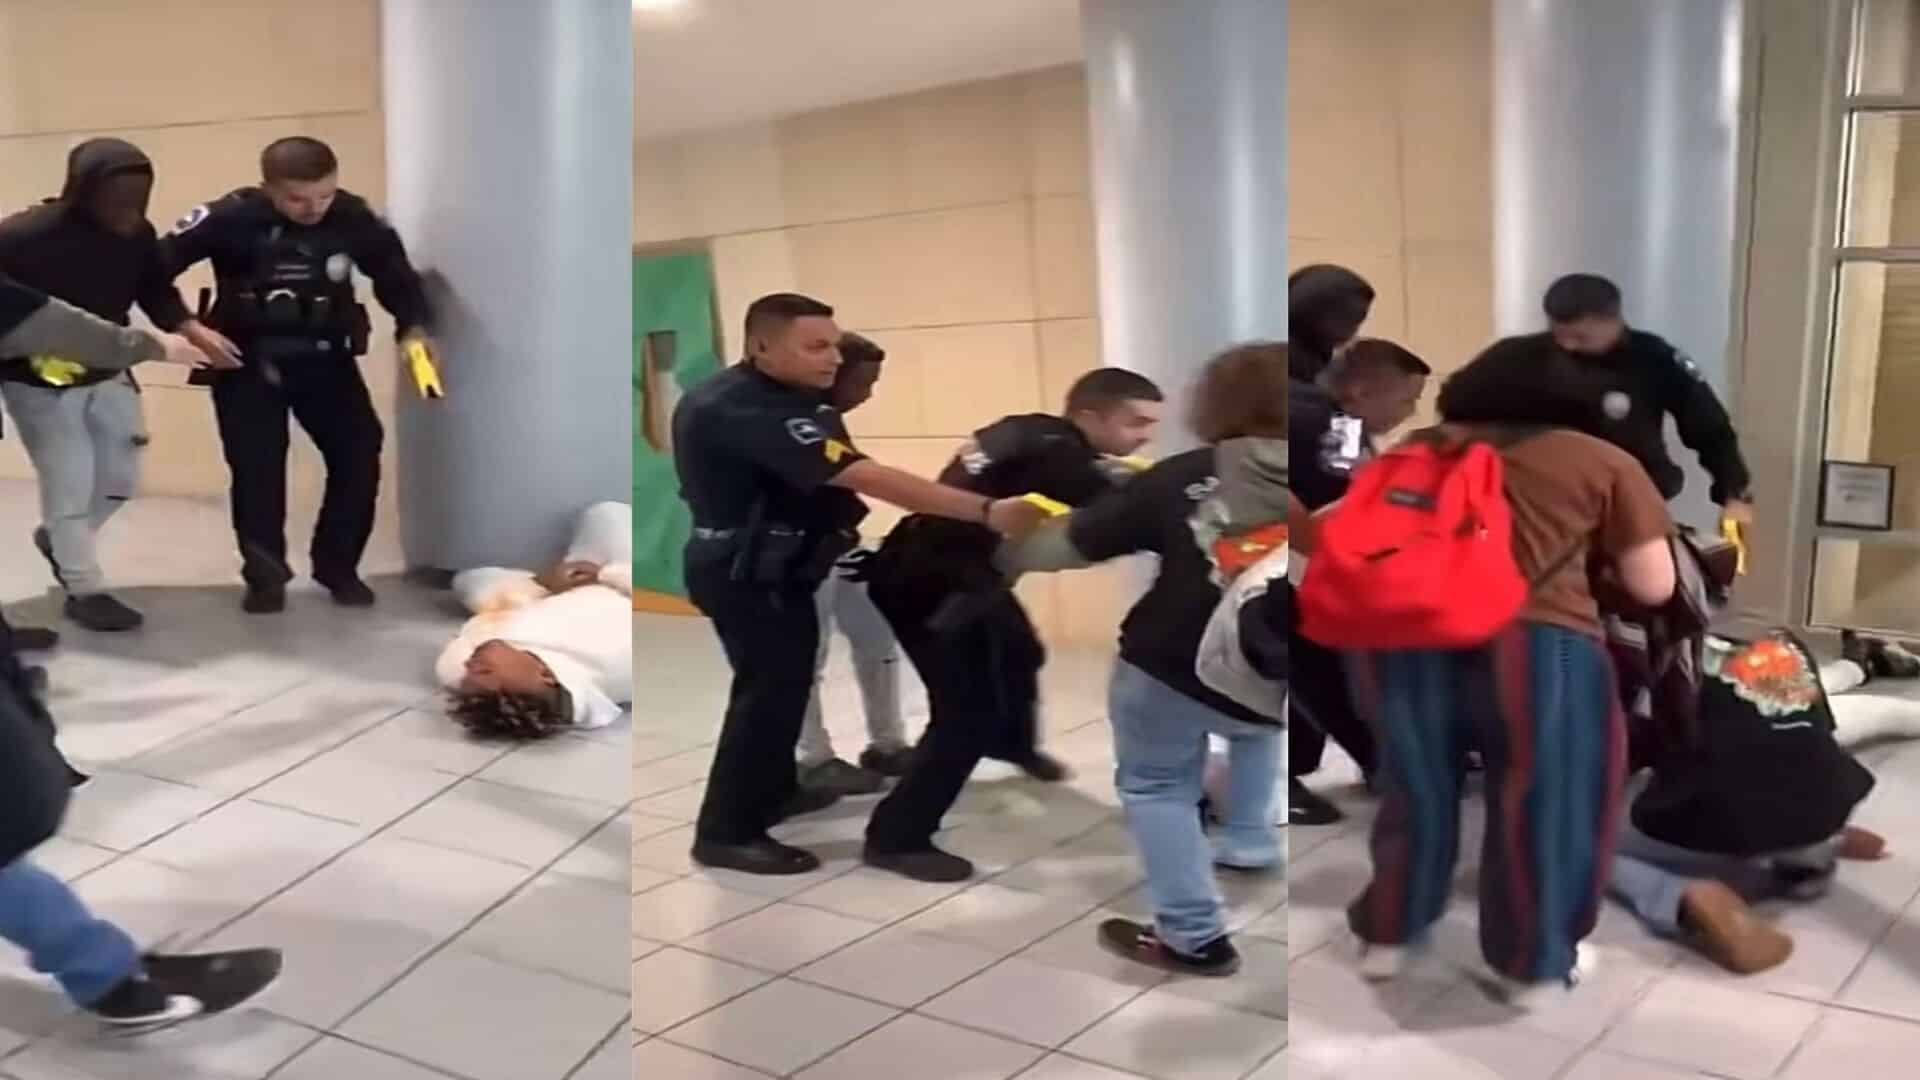 Police Officers Use Stun Gun on Unarmed Black High School Student during Protest